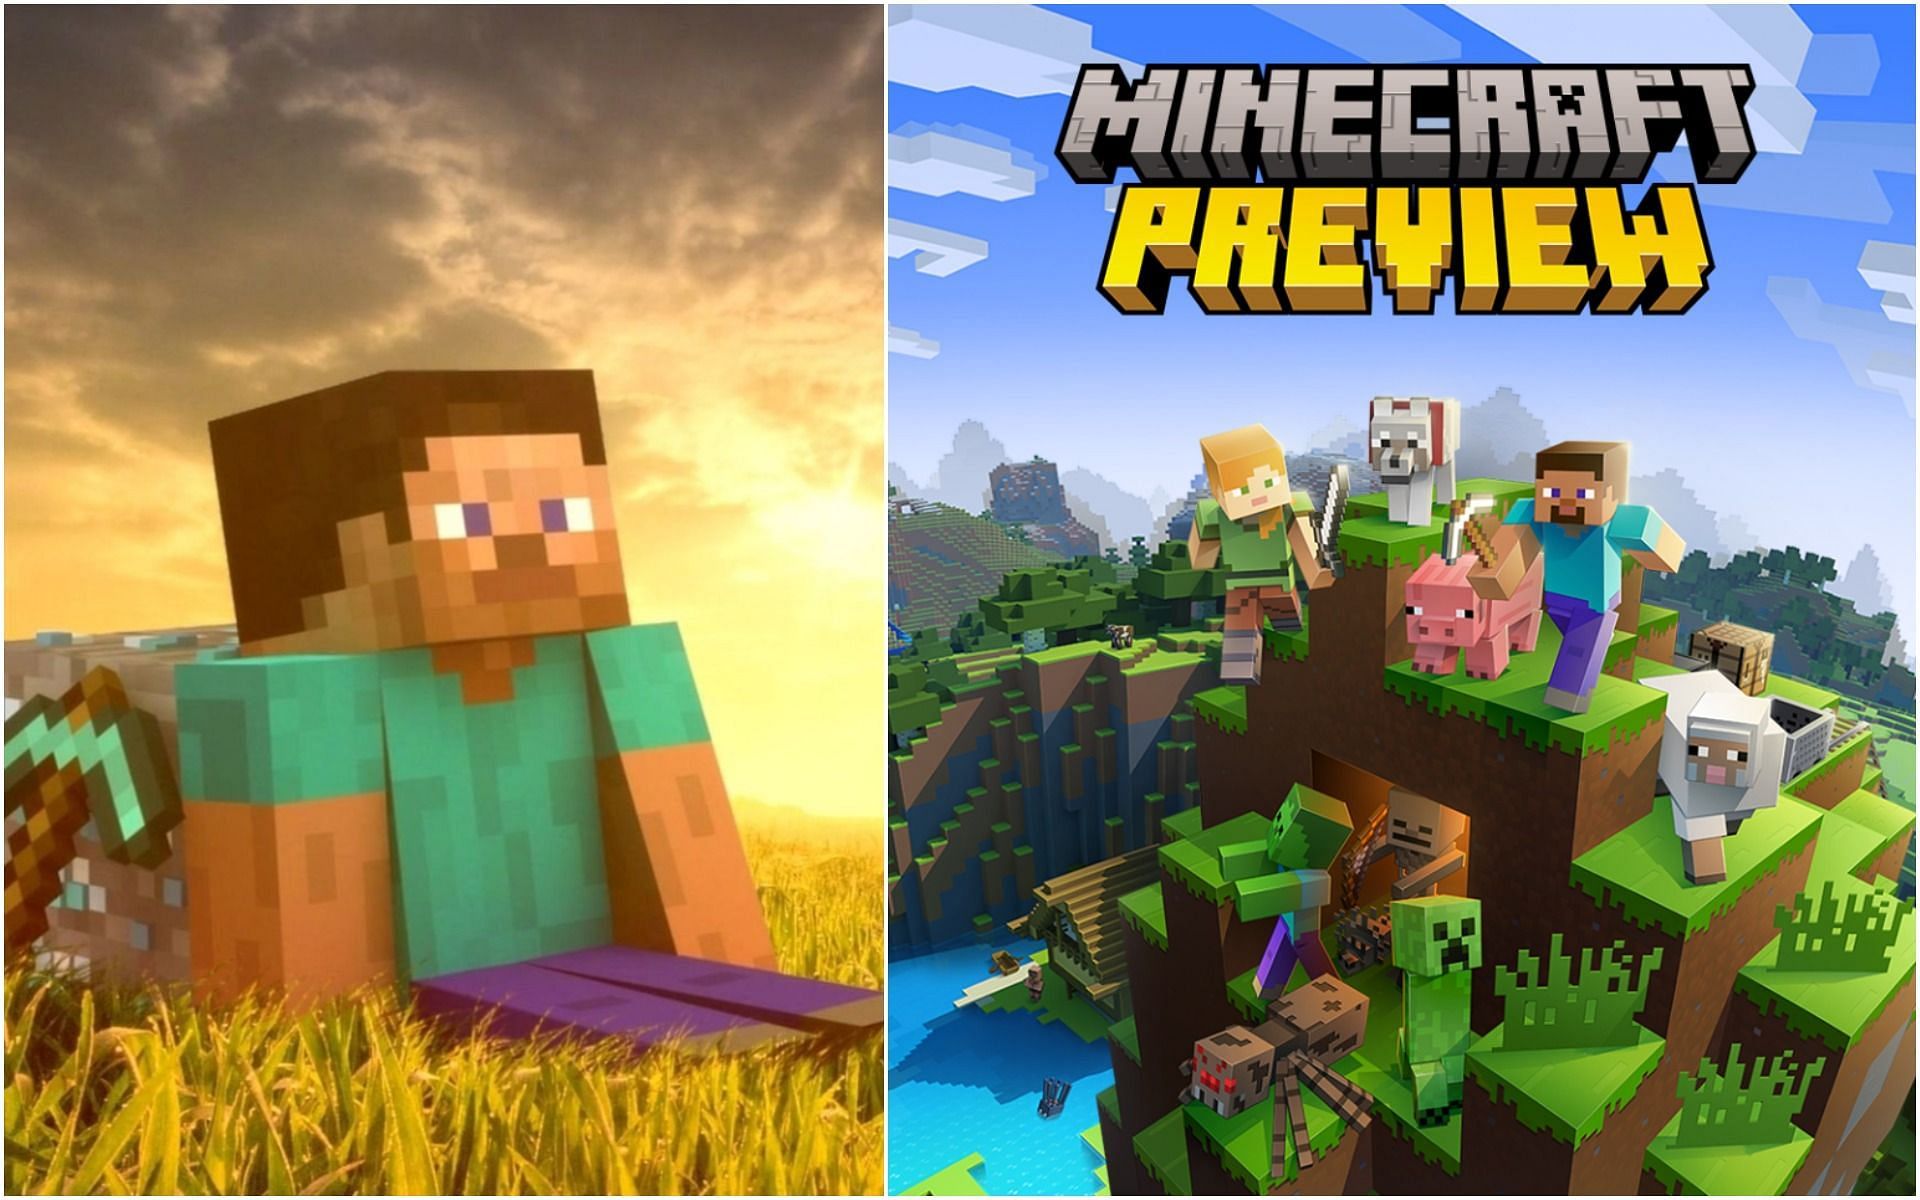 Steve looks on as Minecraft Preview is introduced (Image via Wallpaper Flare and Mojang)